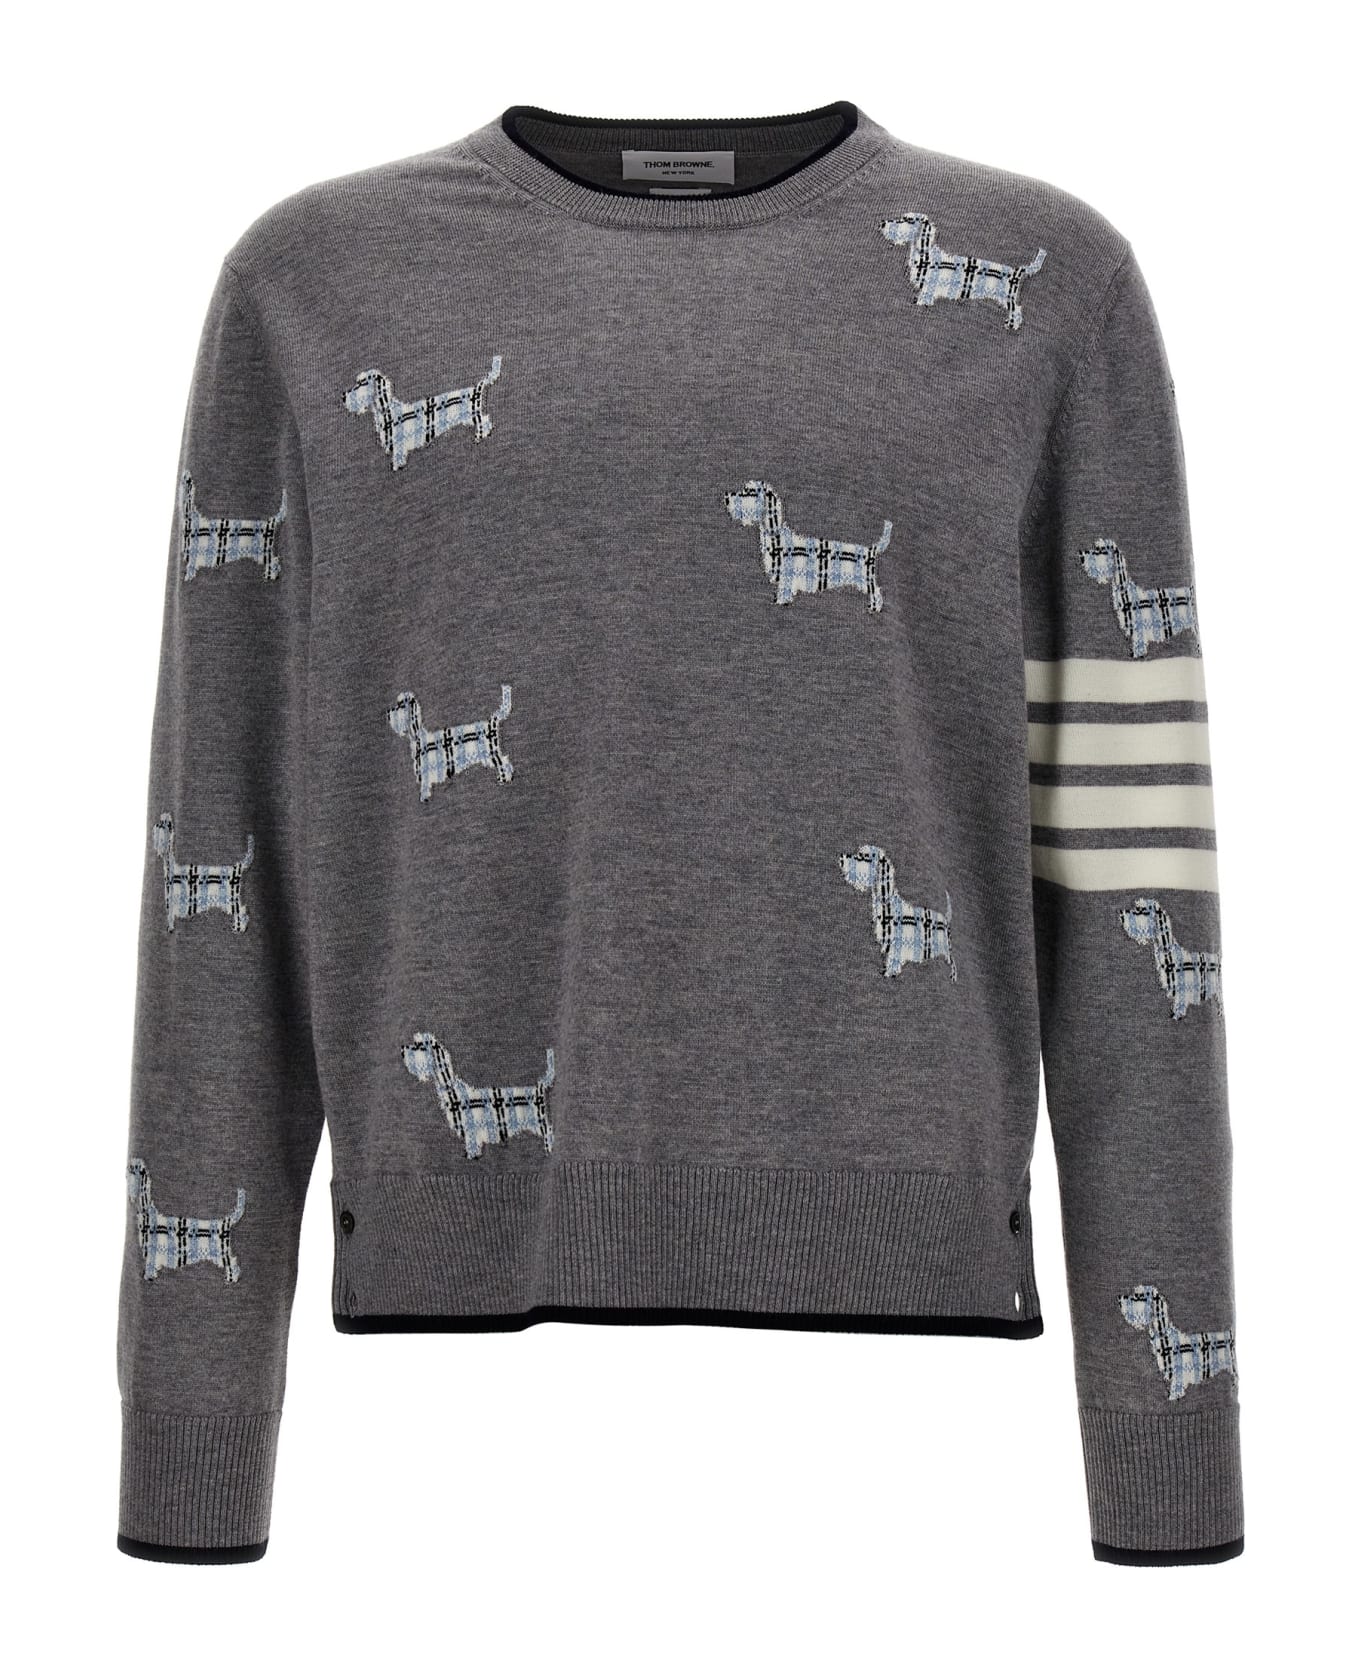 Thom Browne 'hector' Sweater - Gray